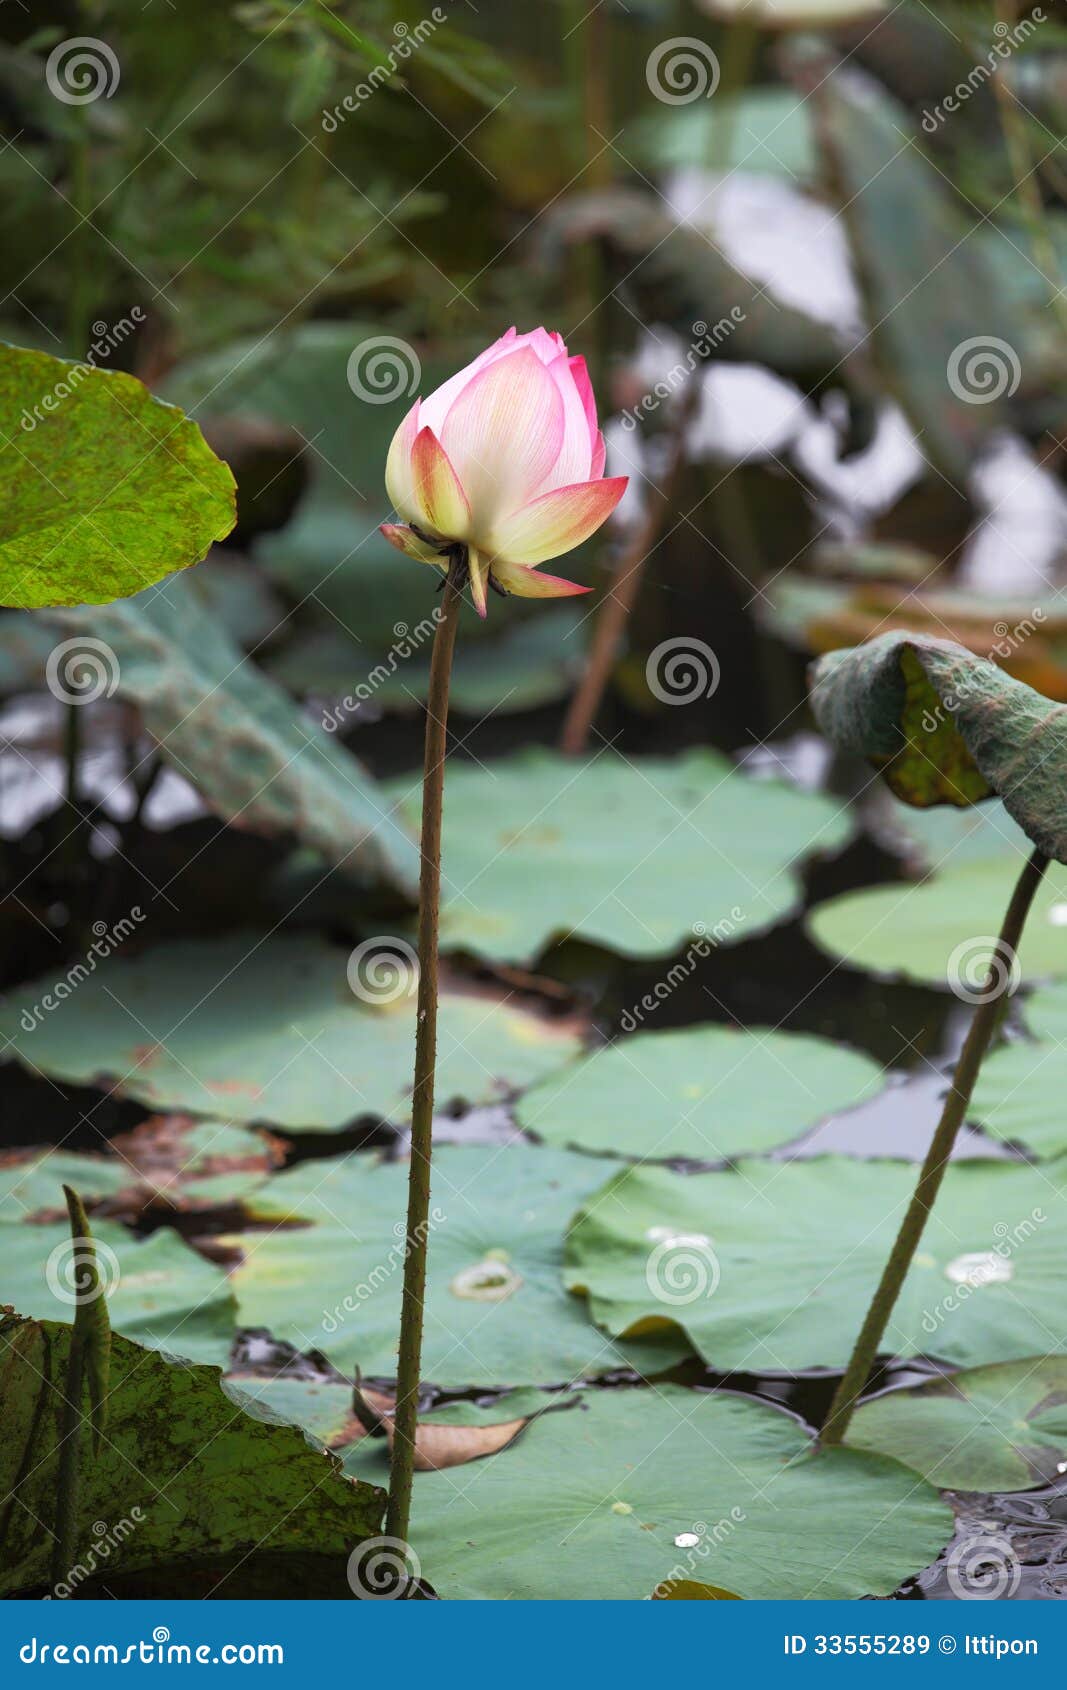 A pink lotus flower growing upright